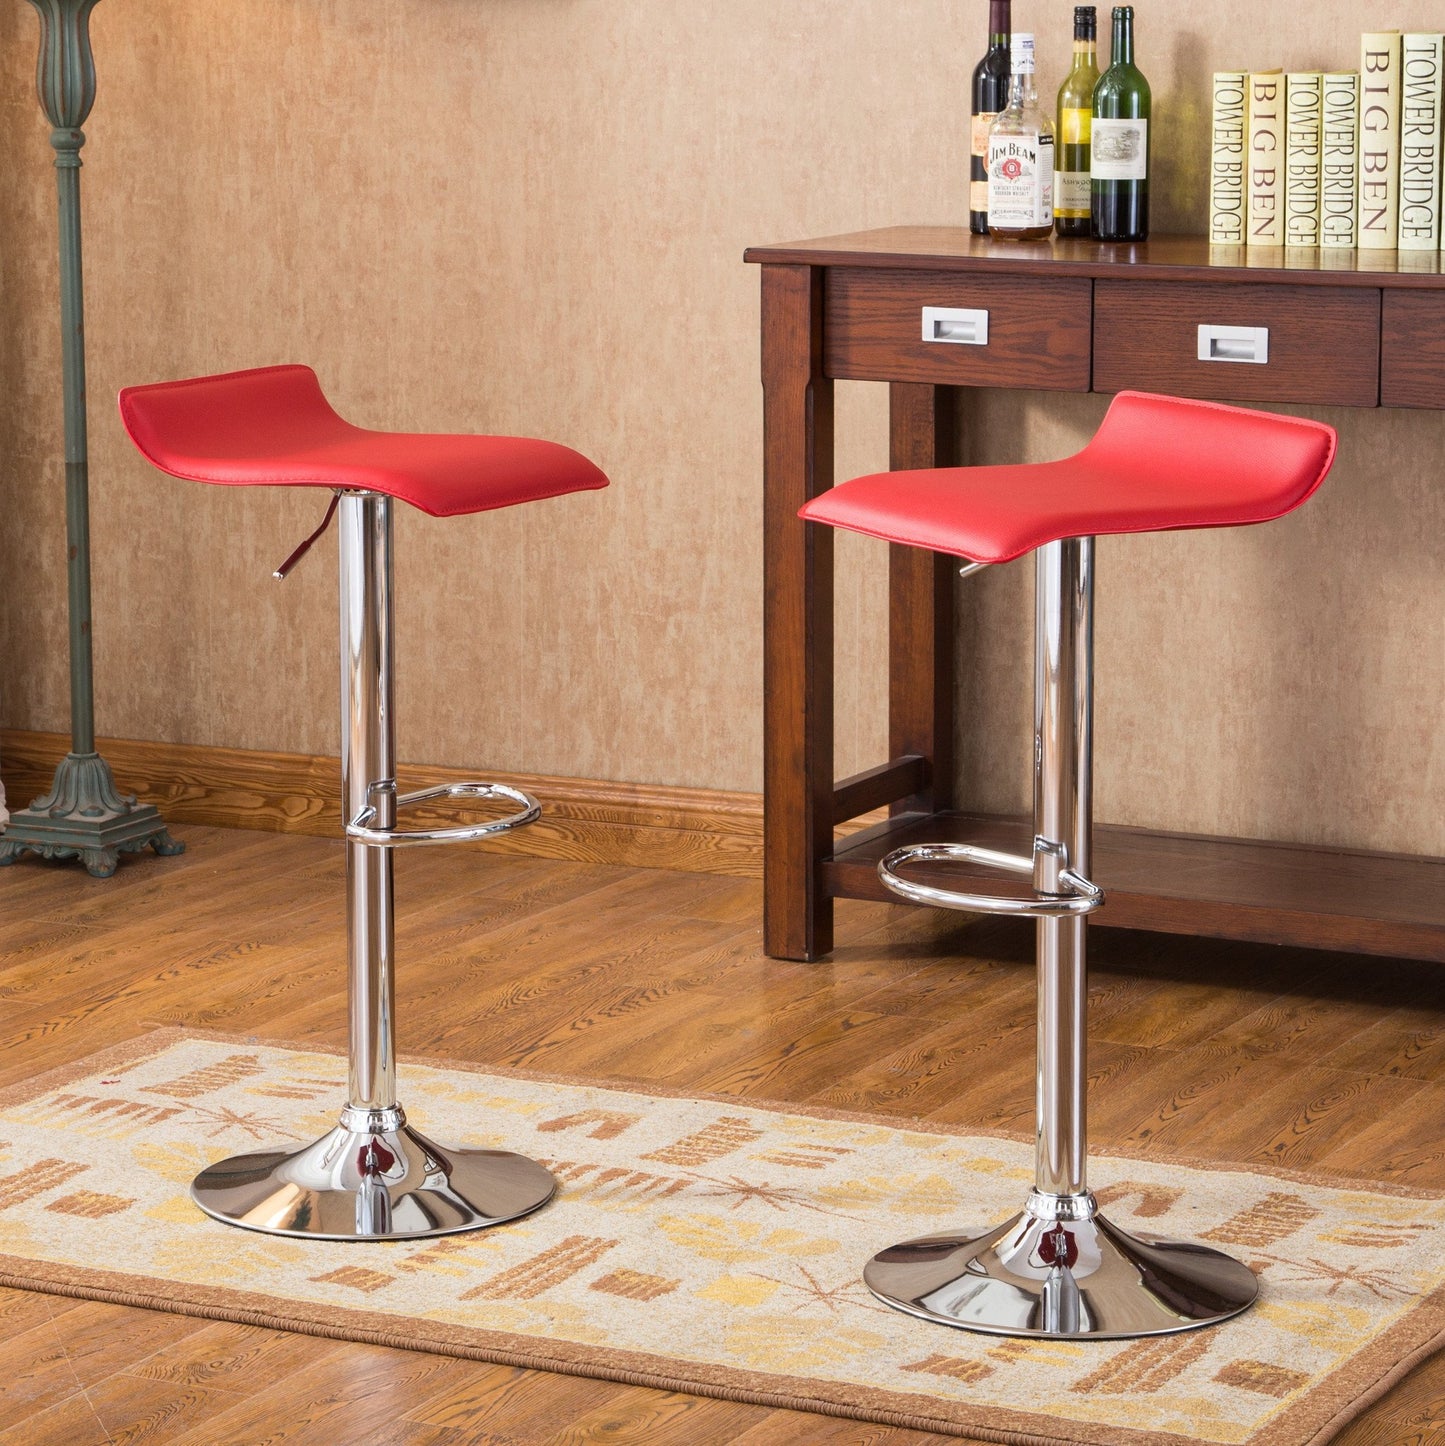 Contemporary Chrome Air Lift Adjustable Swivel Stools with Red Seat  Set of 2